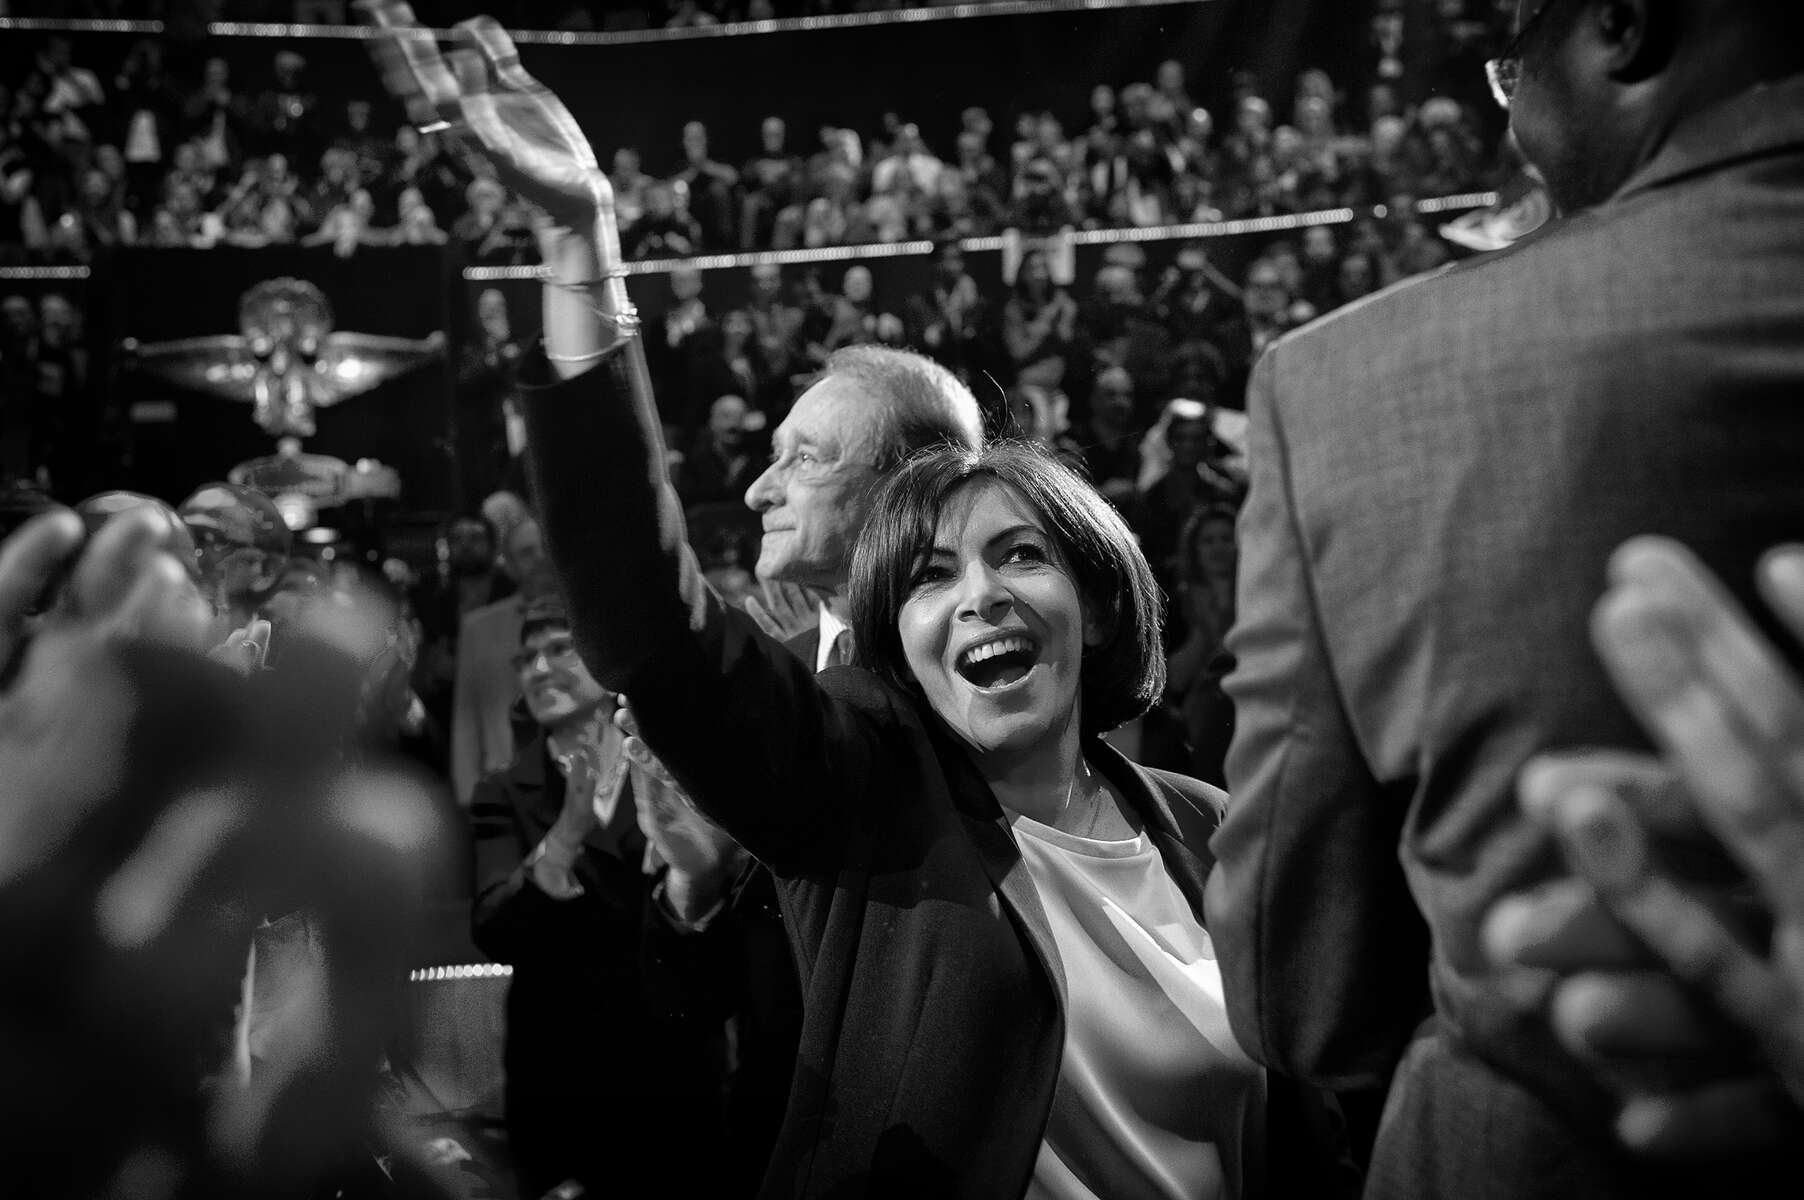 March 13, 2014.  PARIS, FRANCE- Mayoral candidate Anne Hidalgo greets friends and supporters at her big rally at Paris' historic Cirque d'Hiver.  For the first time in France's history, Paris will have a woman as a mayor - either Socialist Anne Hidalgo or Center-Right Nathalie Kosciusko-Morizet.  Photo by Scout Tufankjian